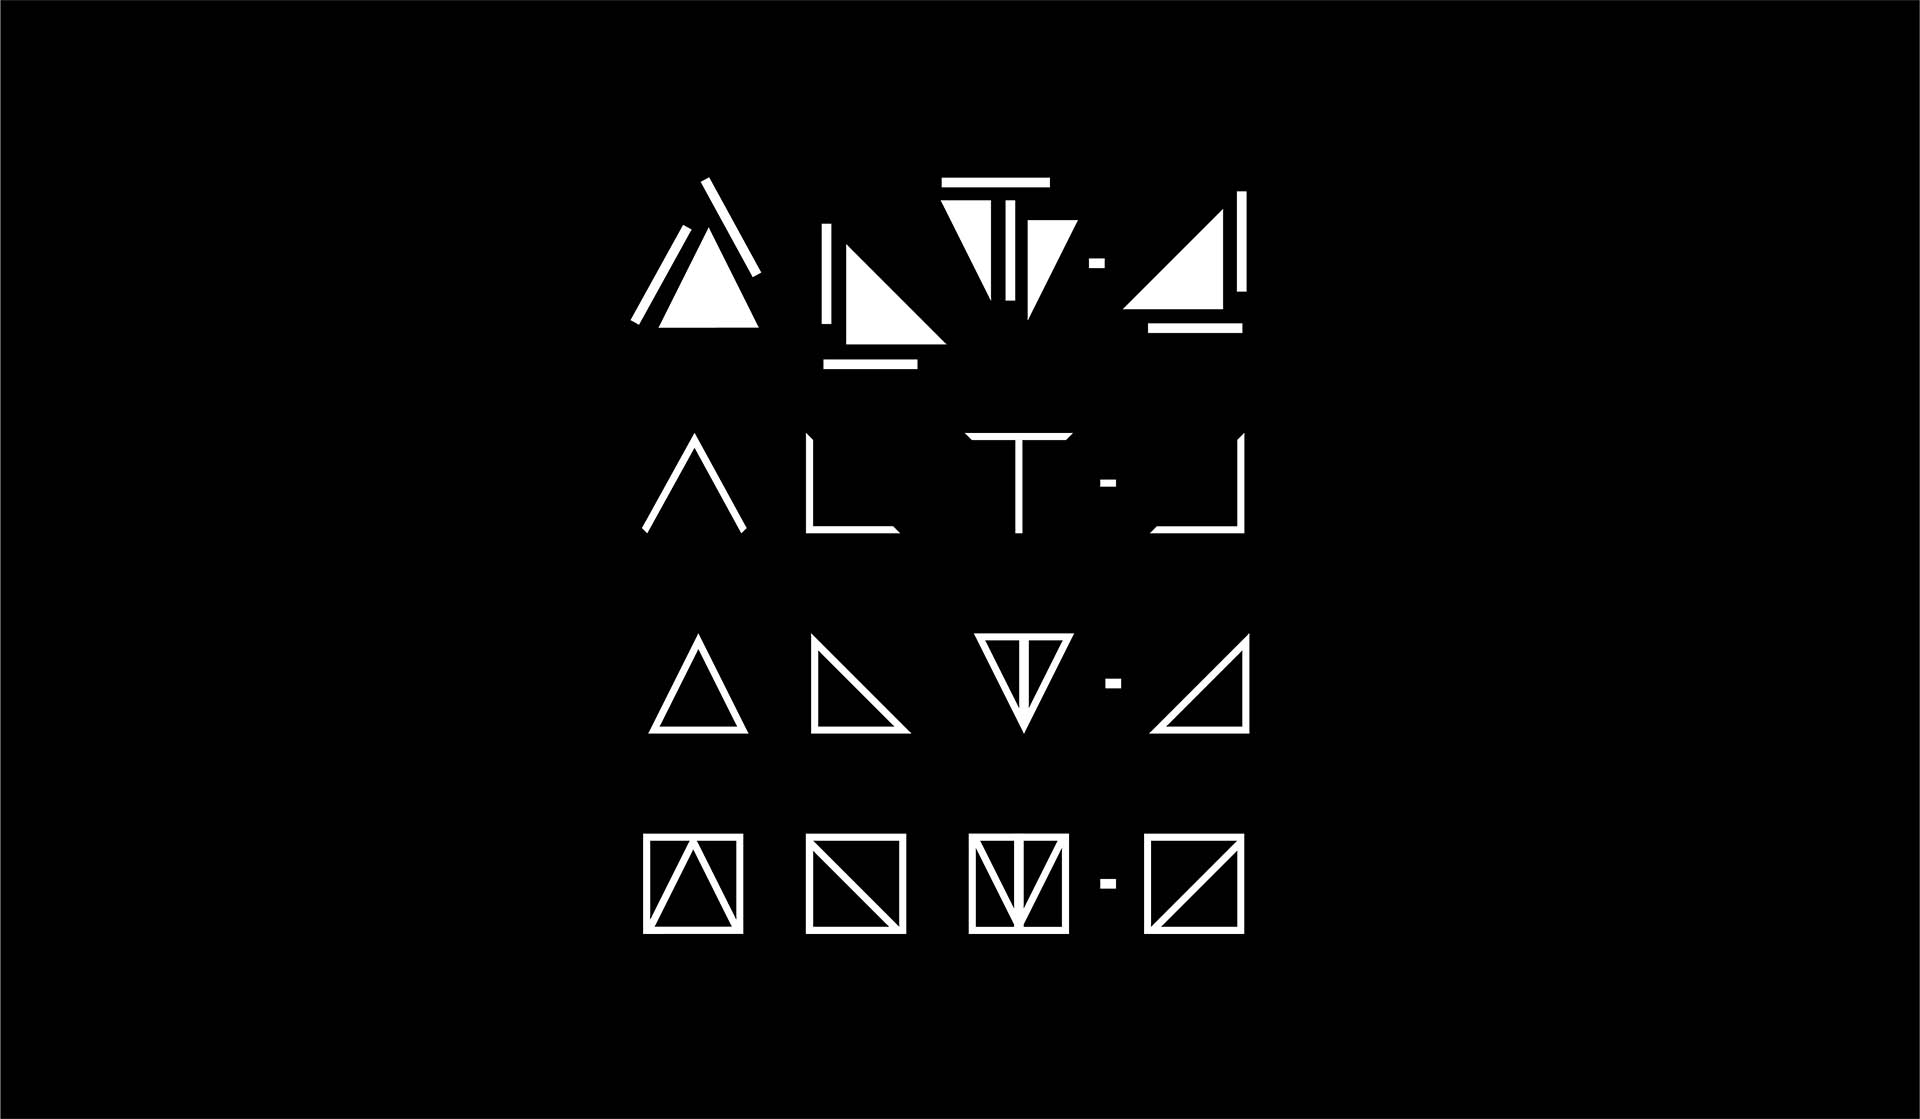 Geometric typography for the band alt-J became the basis of the entire visual language with the goal of creating a comprehensive identity for the band’s tour